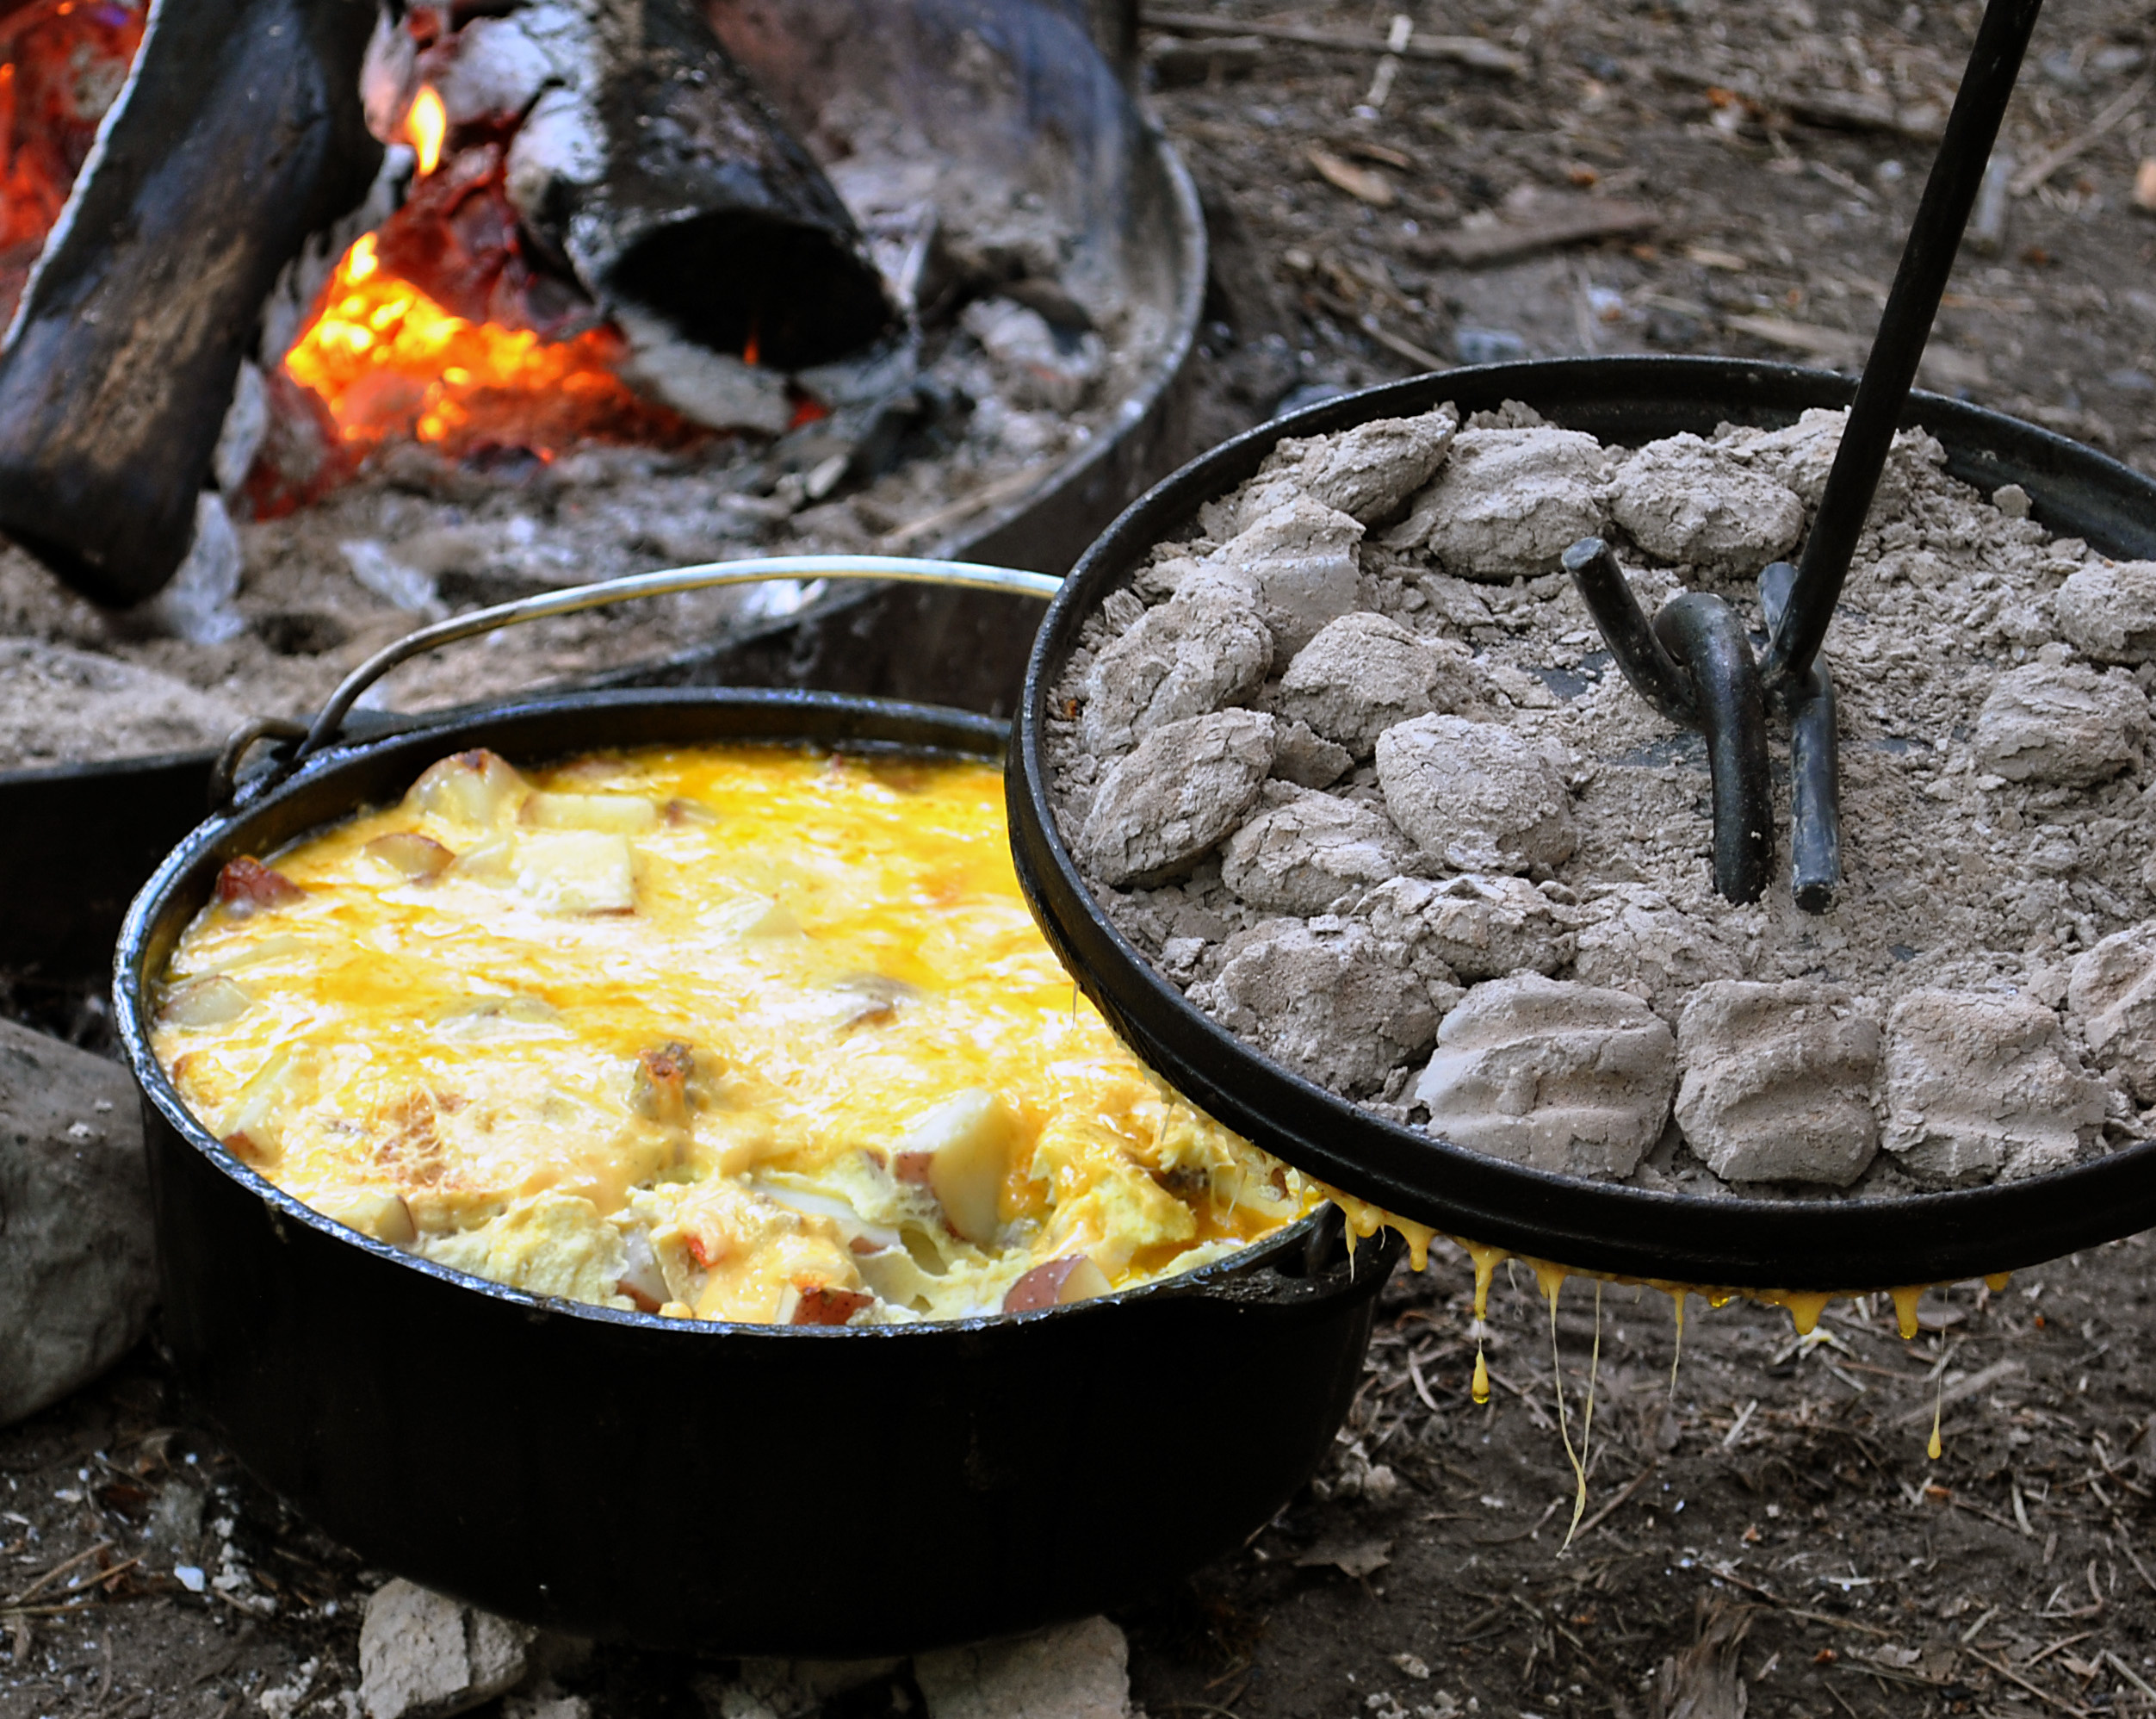 Dutch oven cooking at Louisiana State Parks